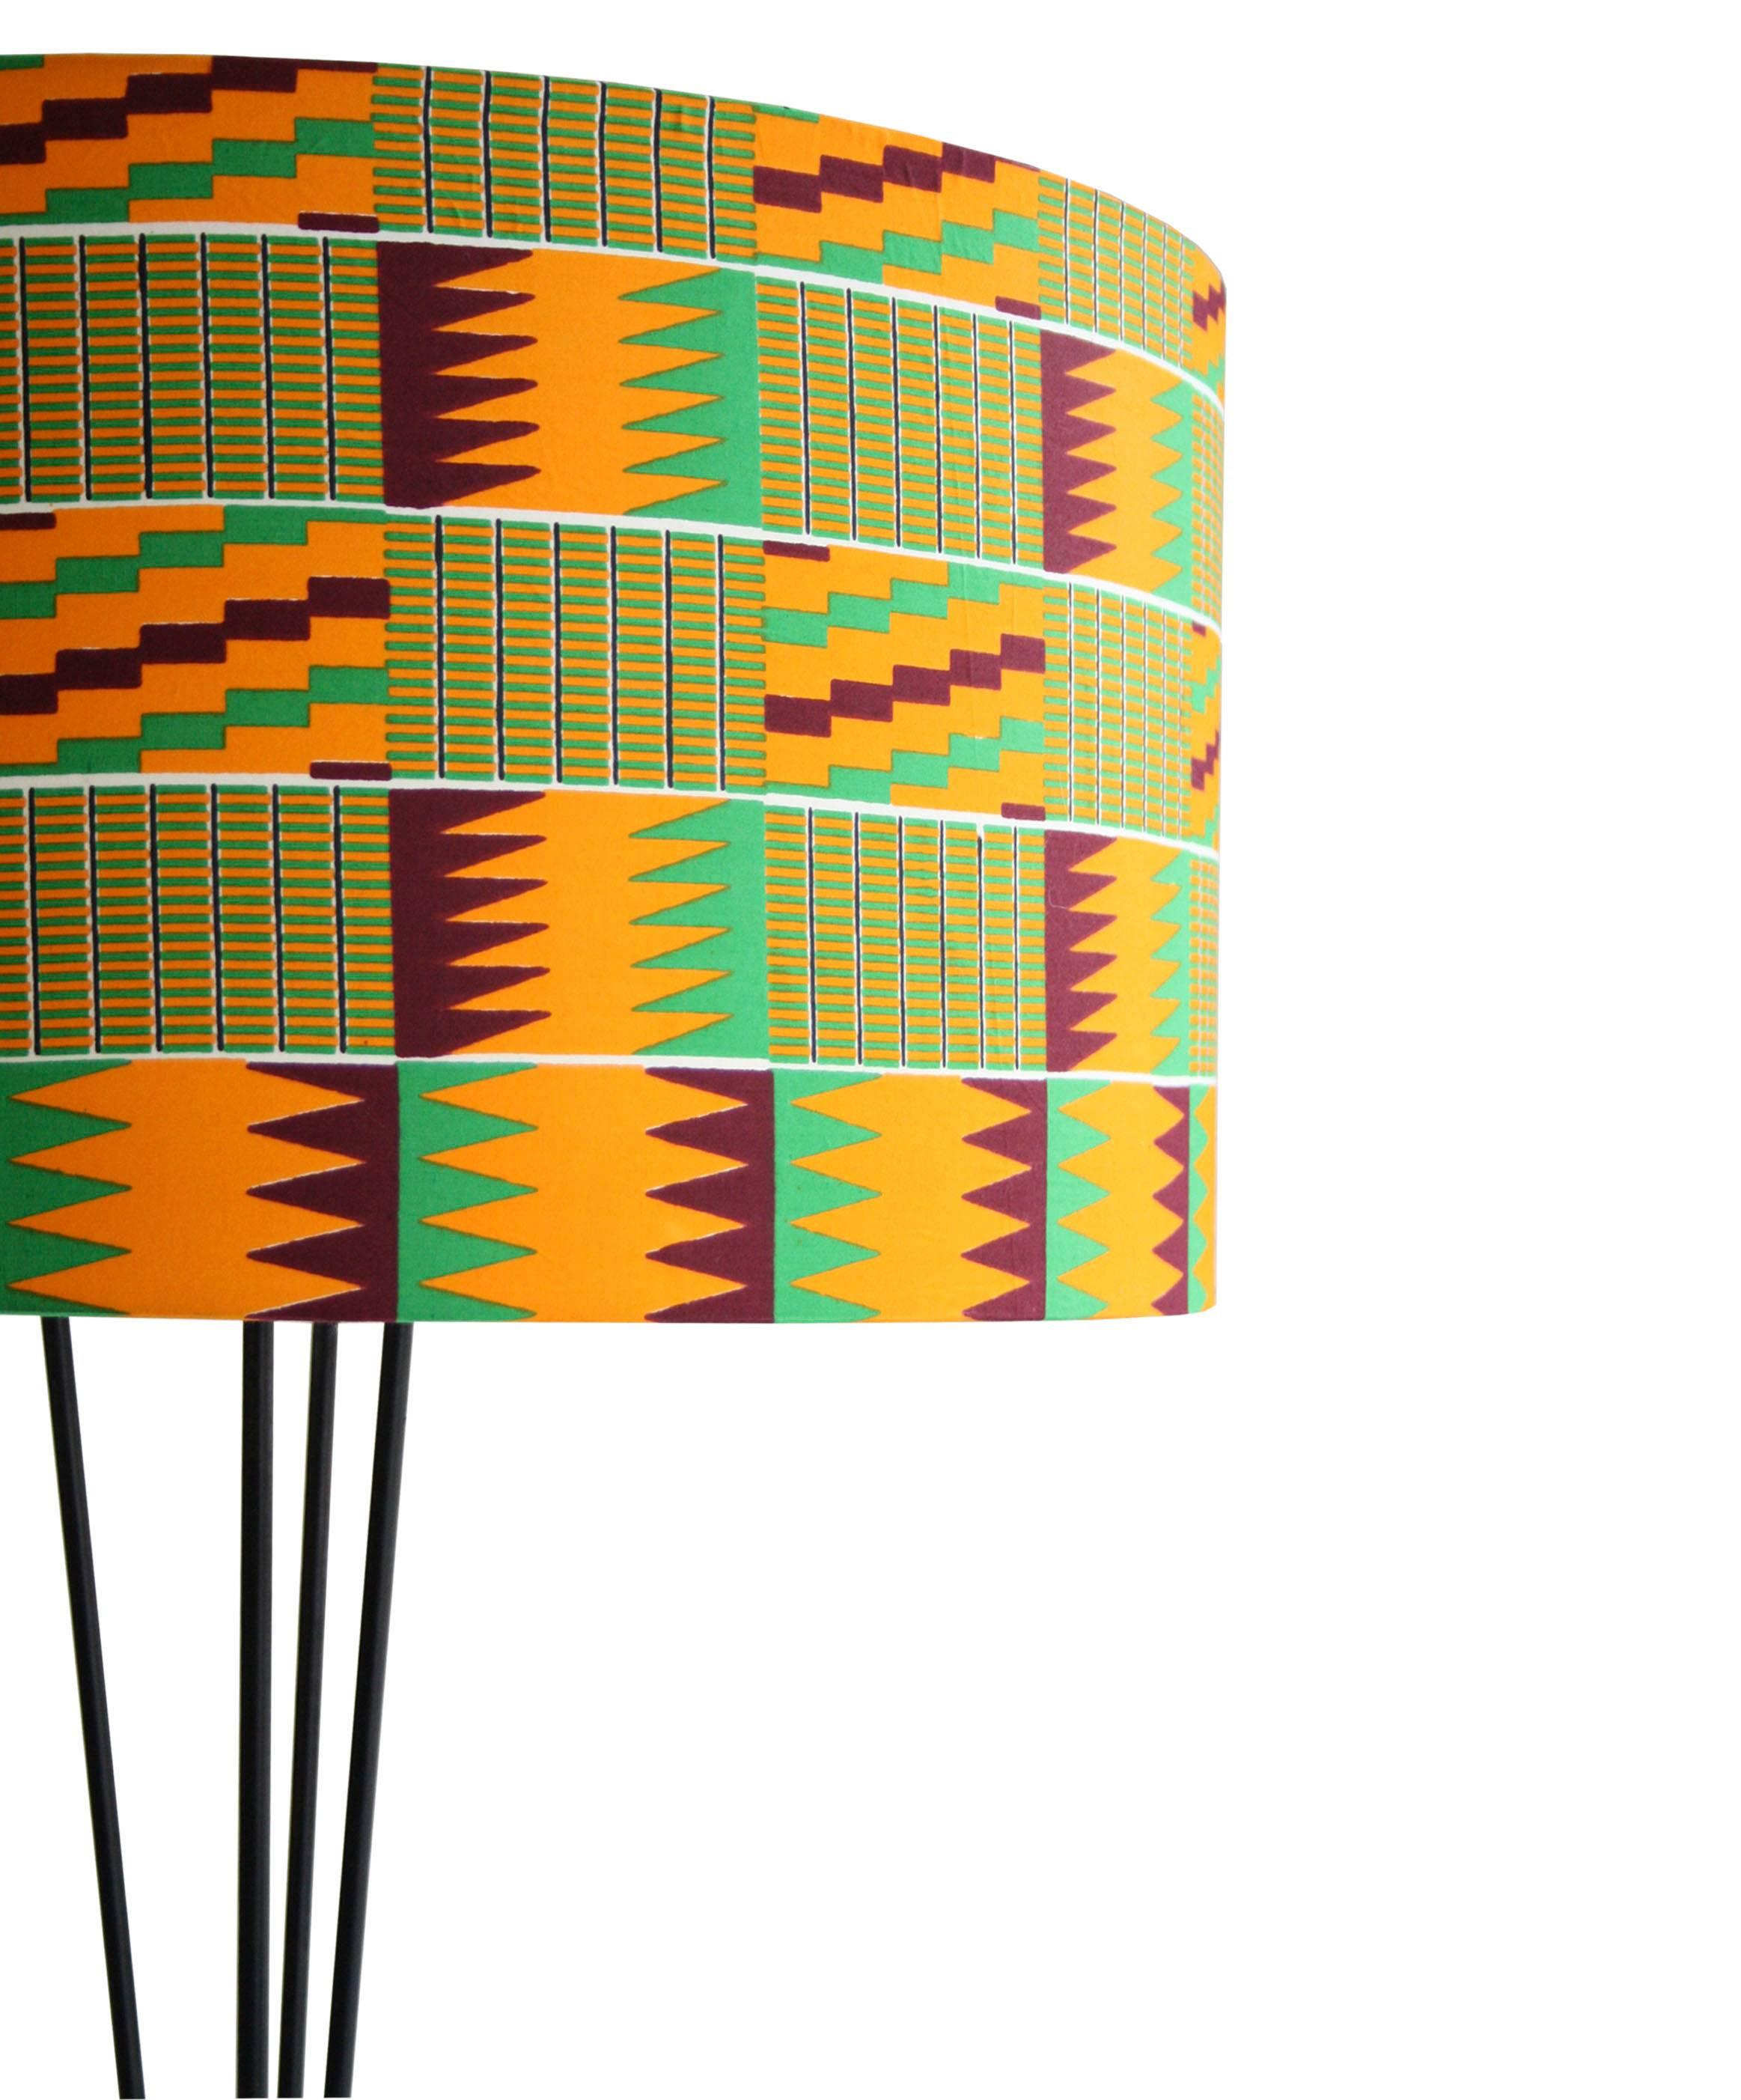 Floor lamp with black lacquered metallic structure with kenyan kitenge upholstered lamp shade.
 